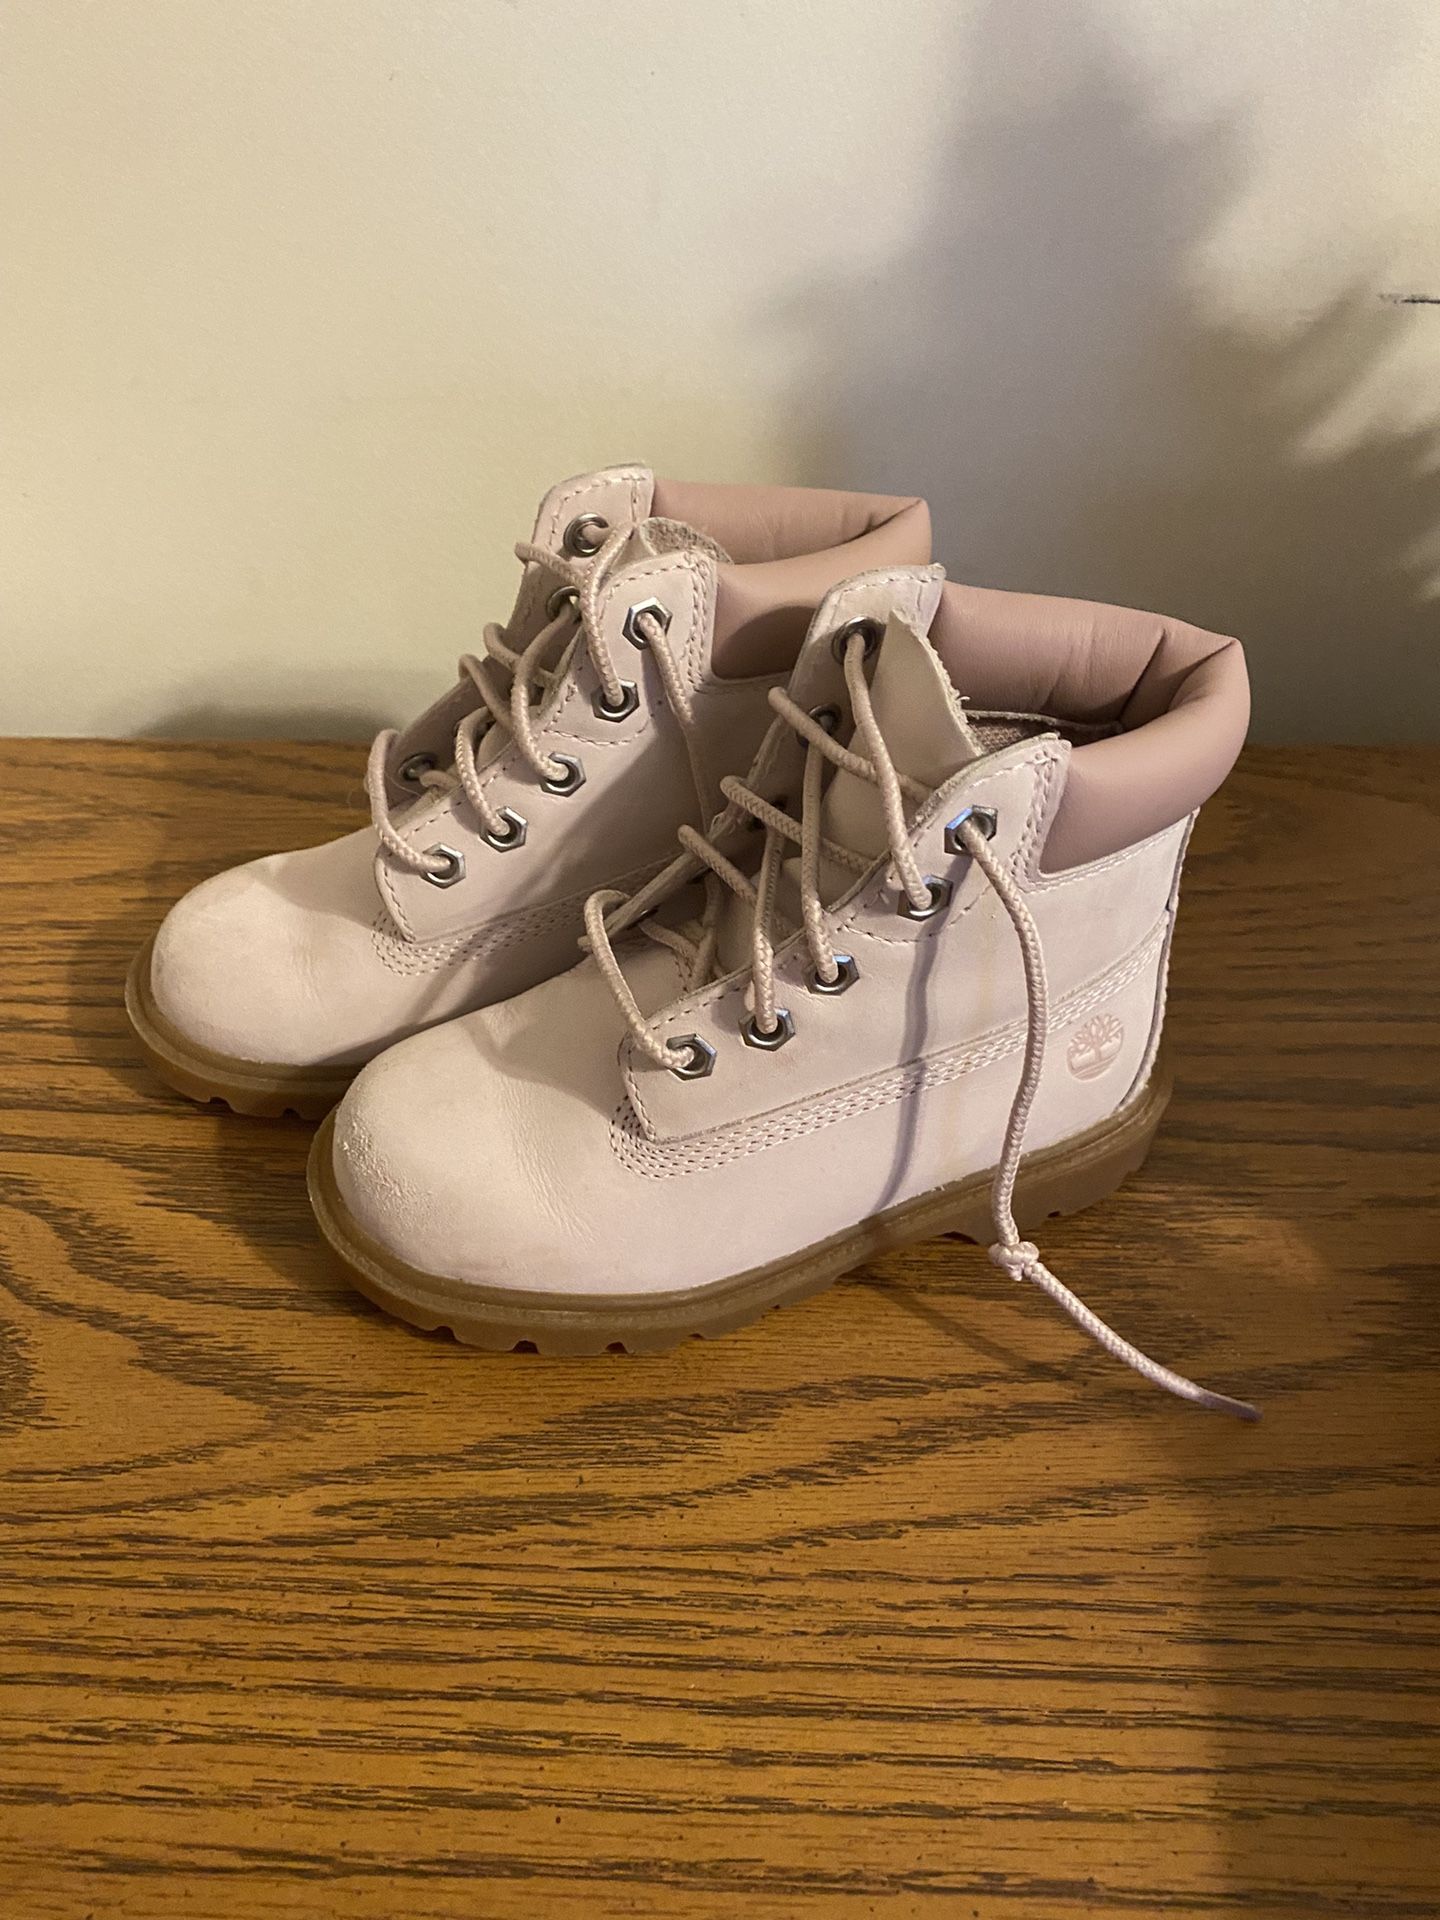 Like New Toddler Light Pink Timberland Boots Size 9